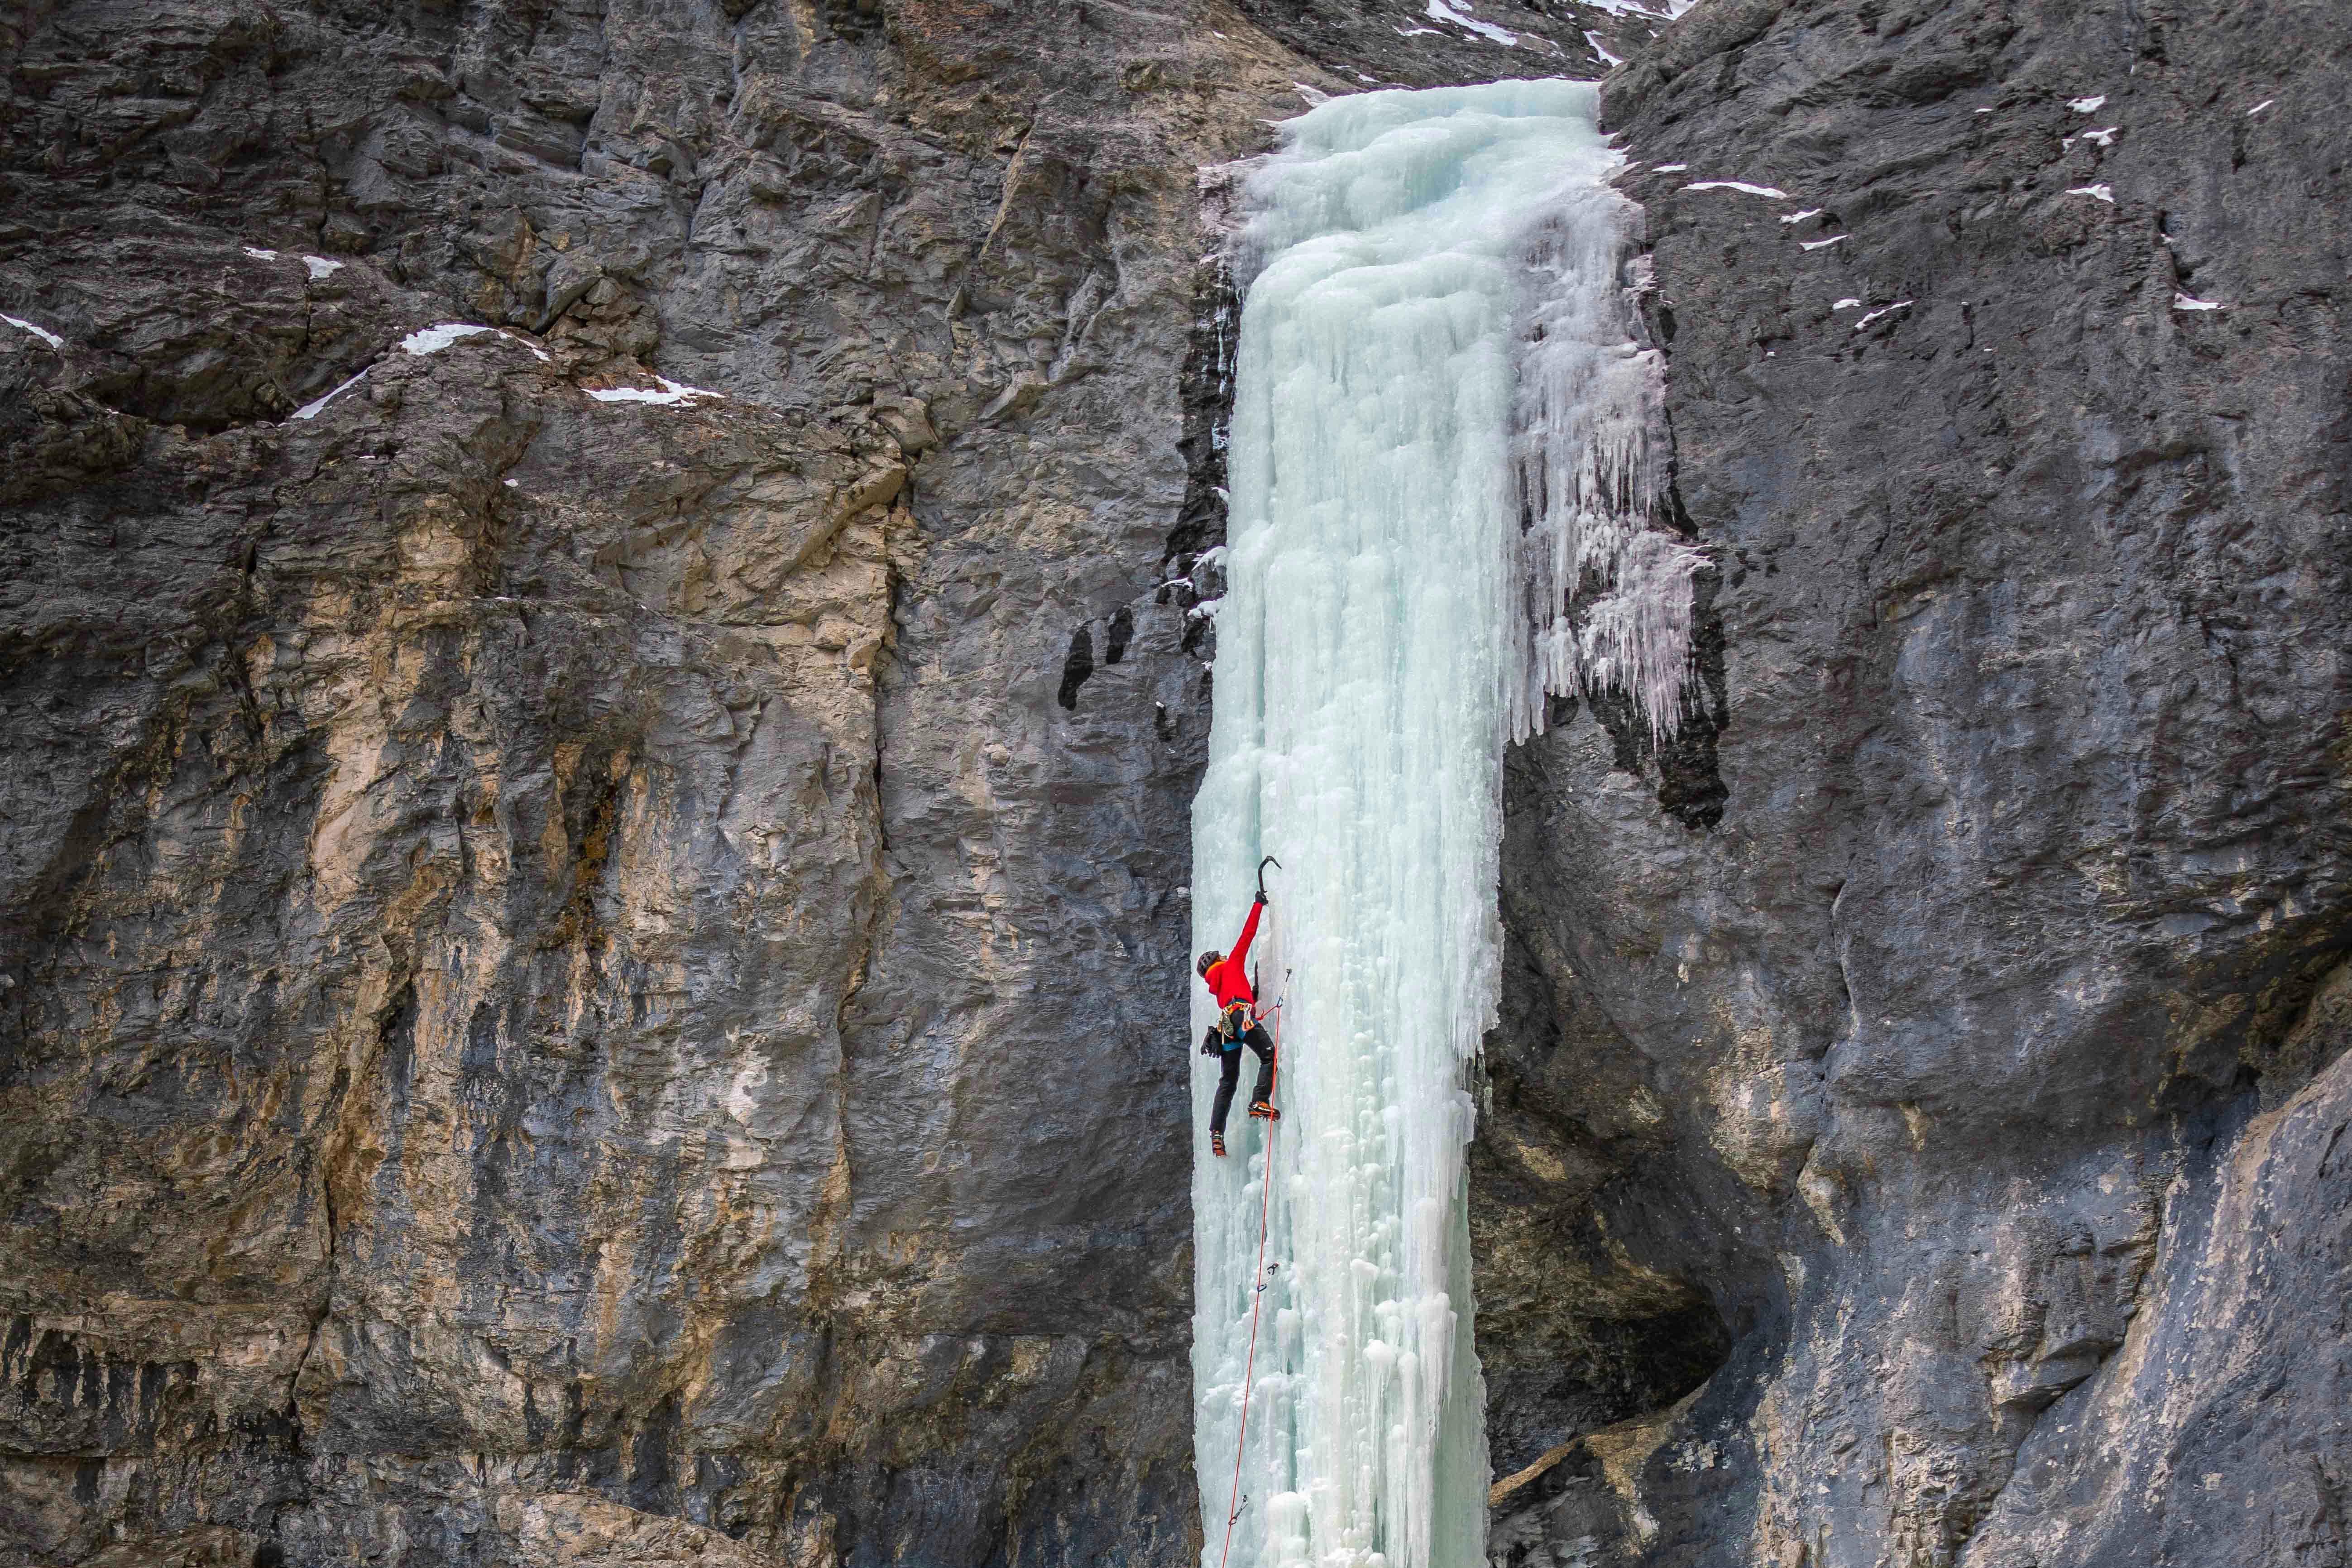 An ice climber reaches up with their axe while climbing a frozen waterfall. The ice is surrounded by large cliffs.